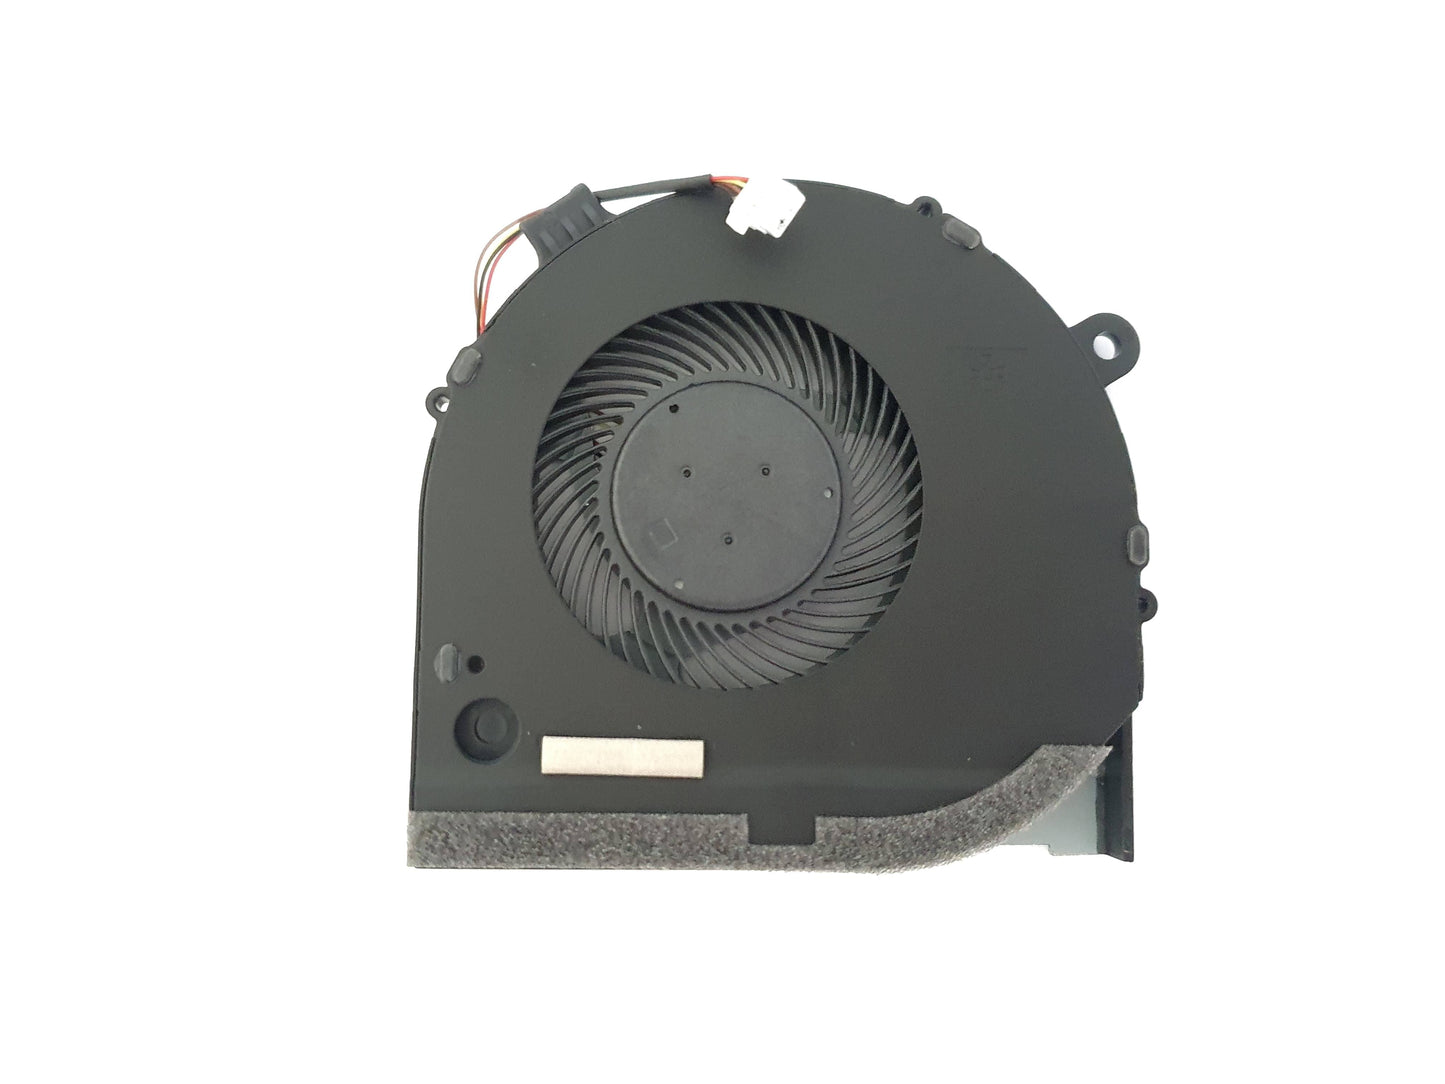 Dell G3 15 3579, G3 17 3779 Laptop CPU Cooling Fan TJHF2 Dell